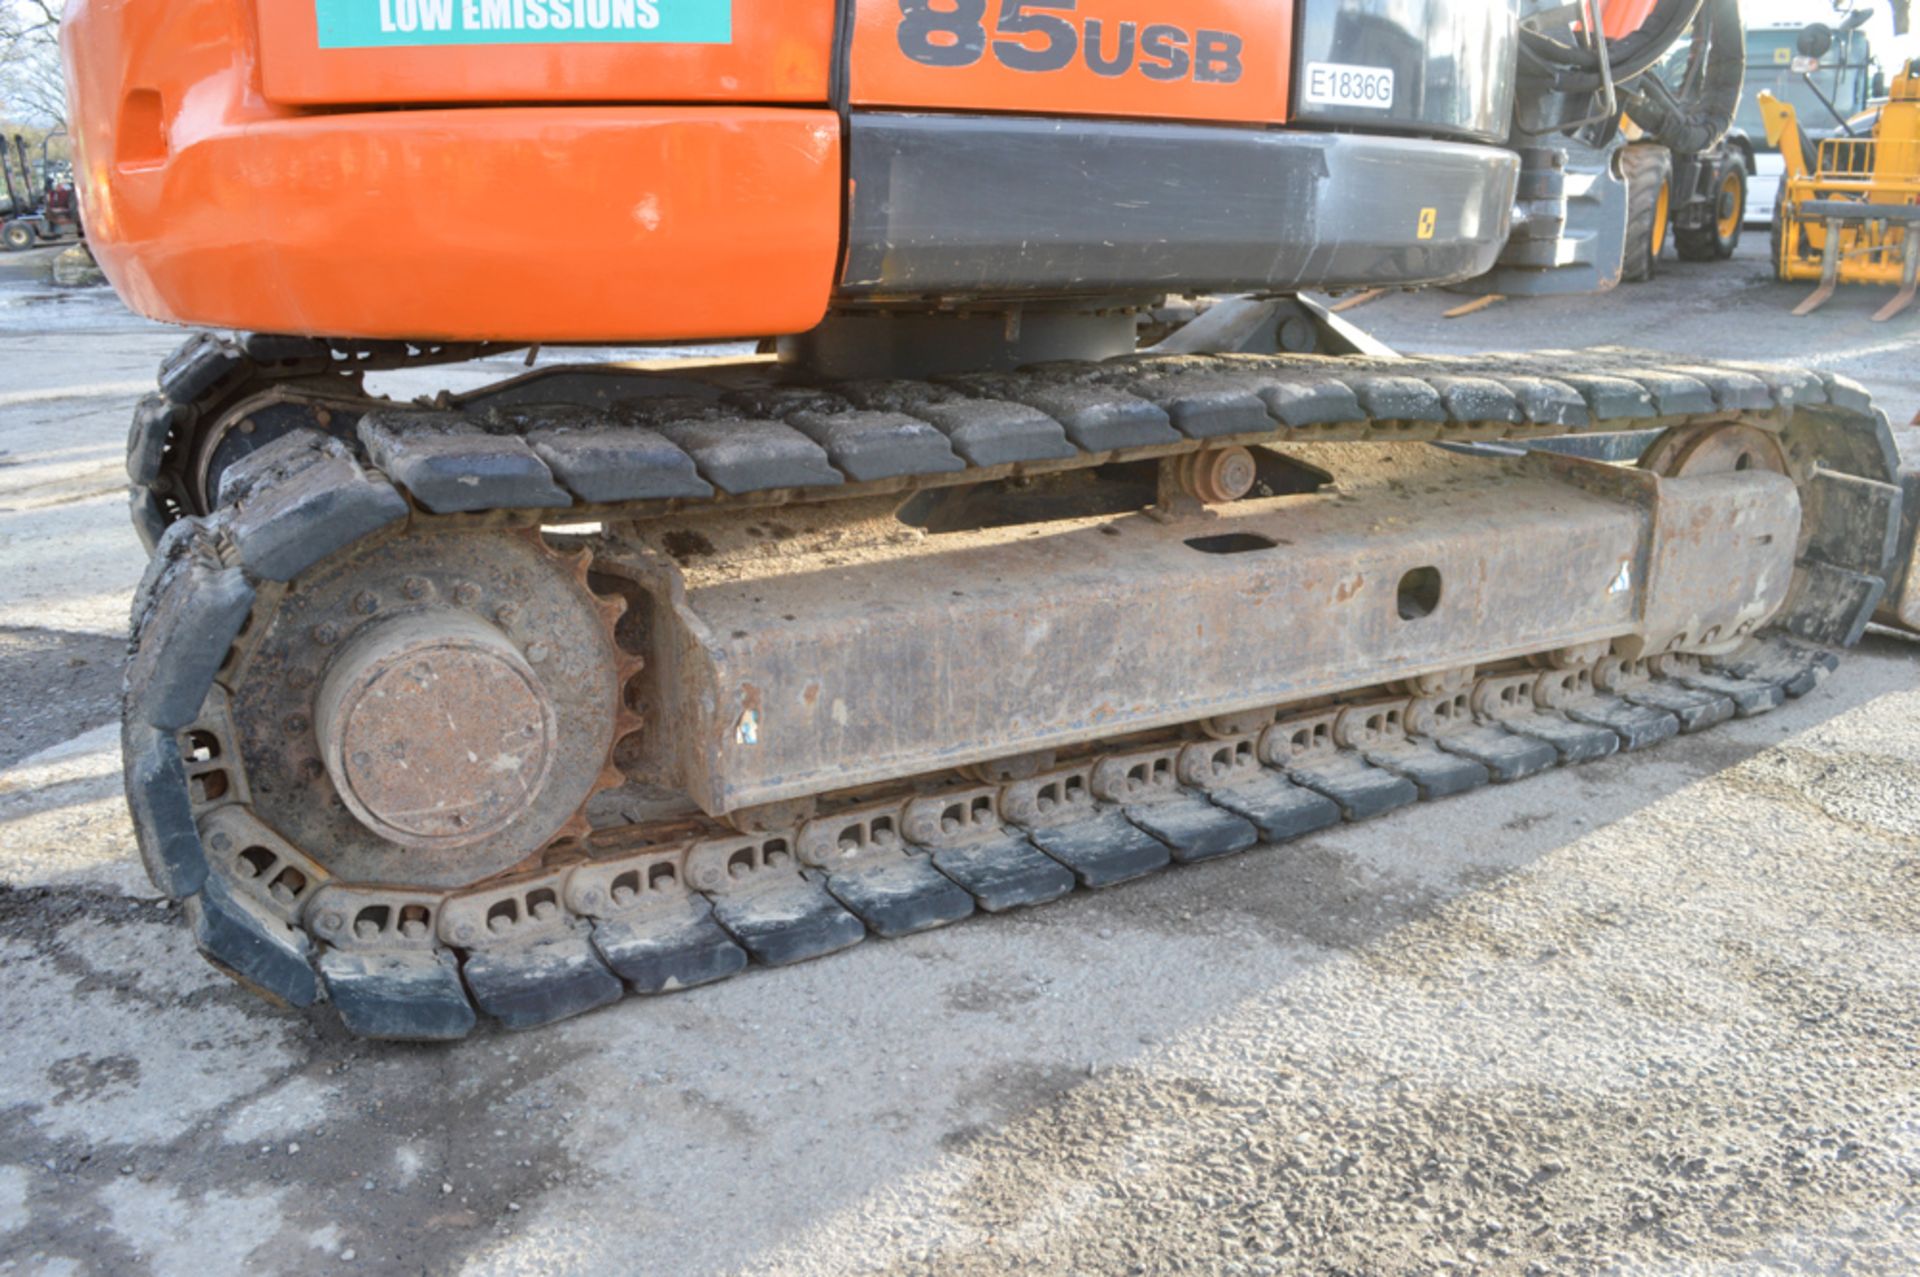 Hitachi 85USB-5A Zaxis 8.5 tonne steel tracked/rubber pad excavator Year: 2013 S/N: 100096 - Image 7 of 12